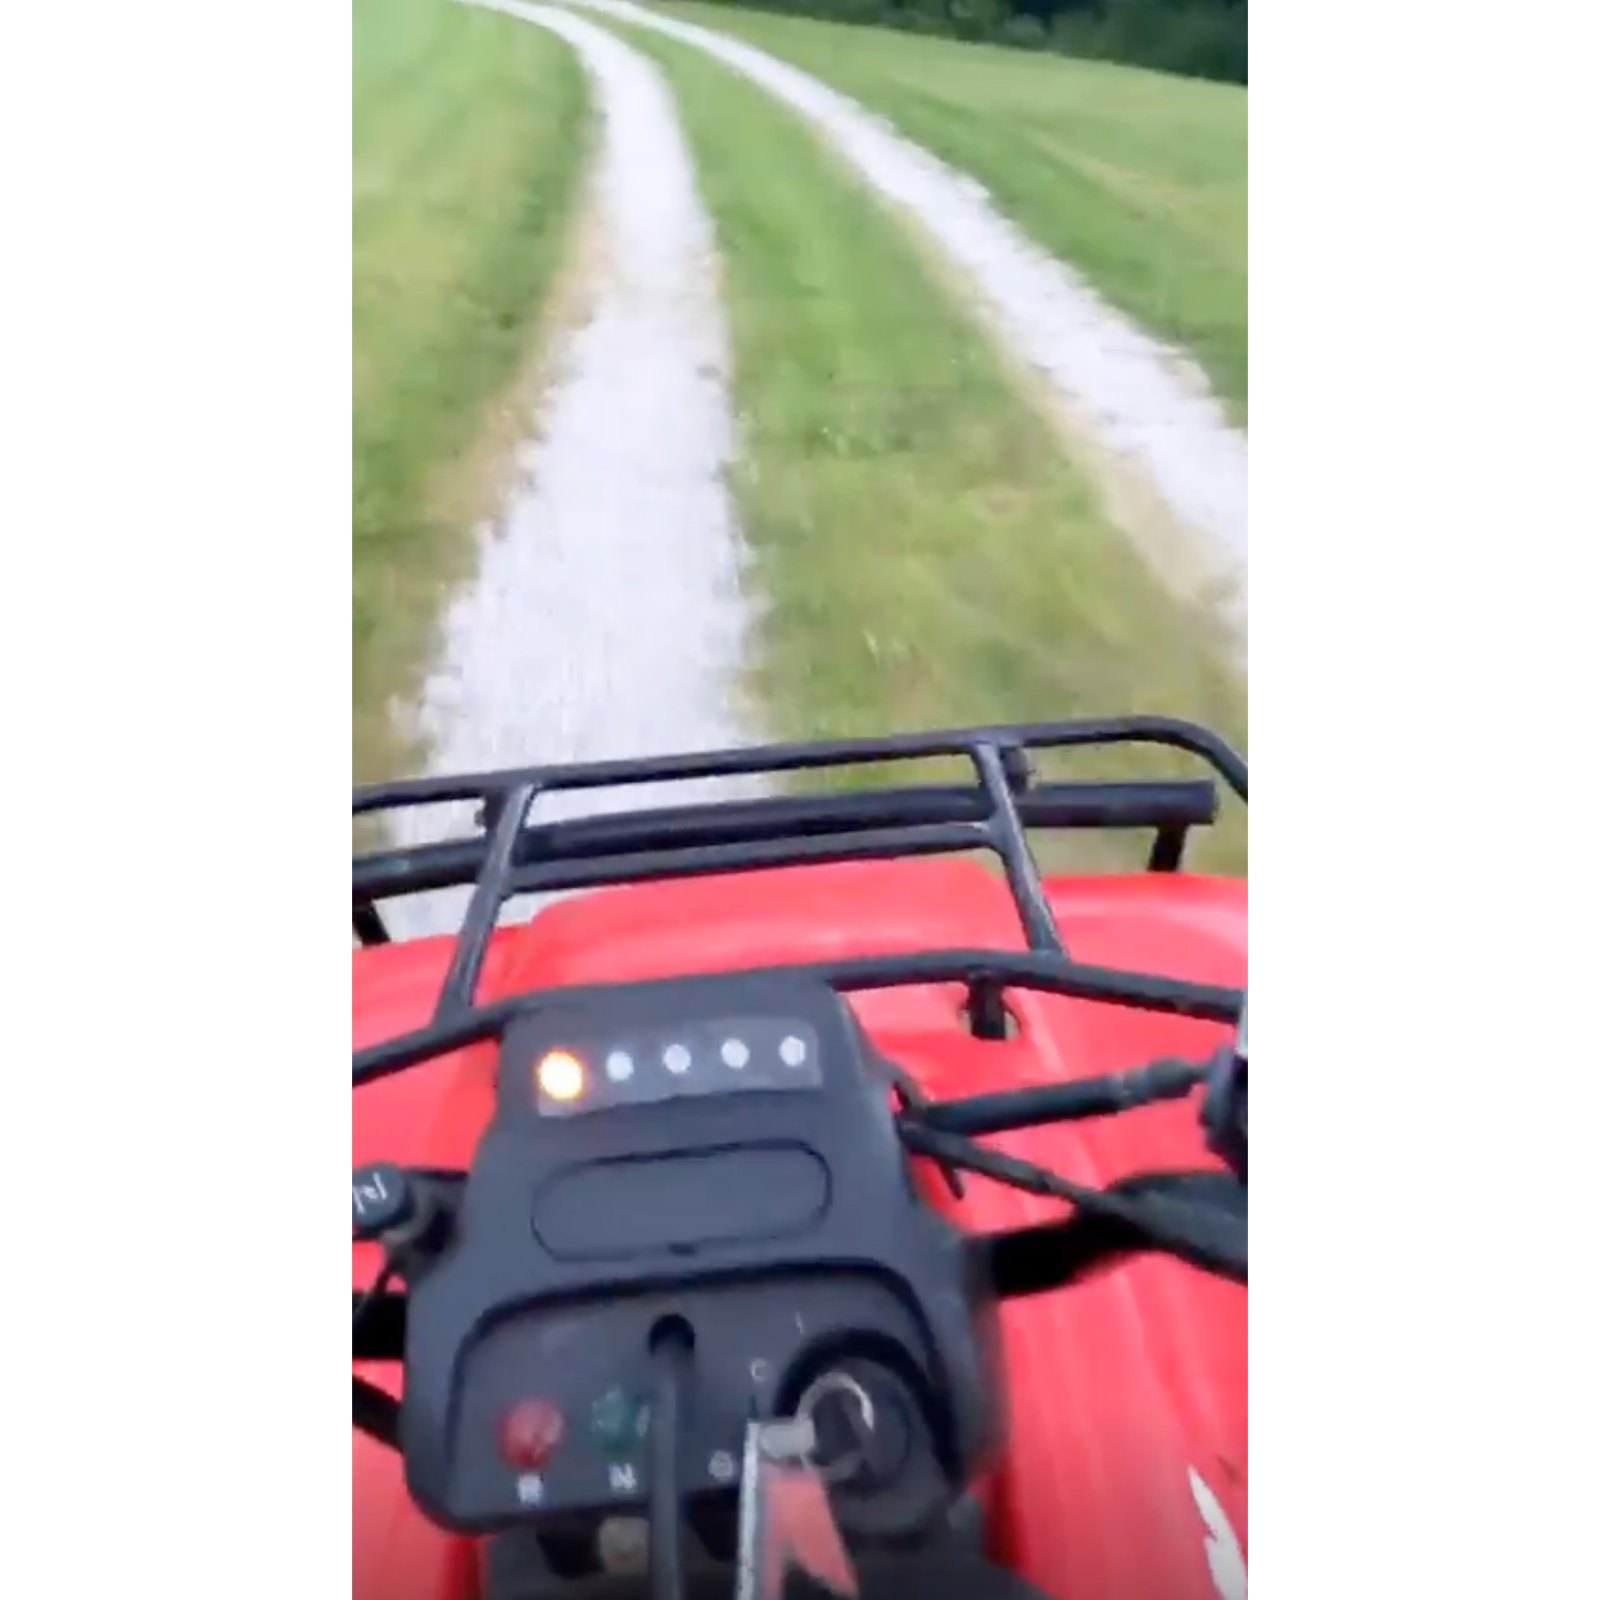 Newlyweds Brittany Cartwright and Jax Taylor Ride ATVS Enjoy Family Time in Kentucky After Wedding